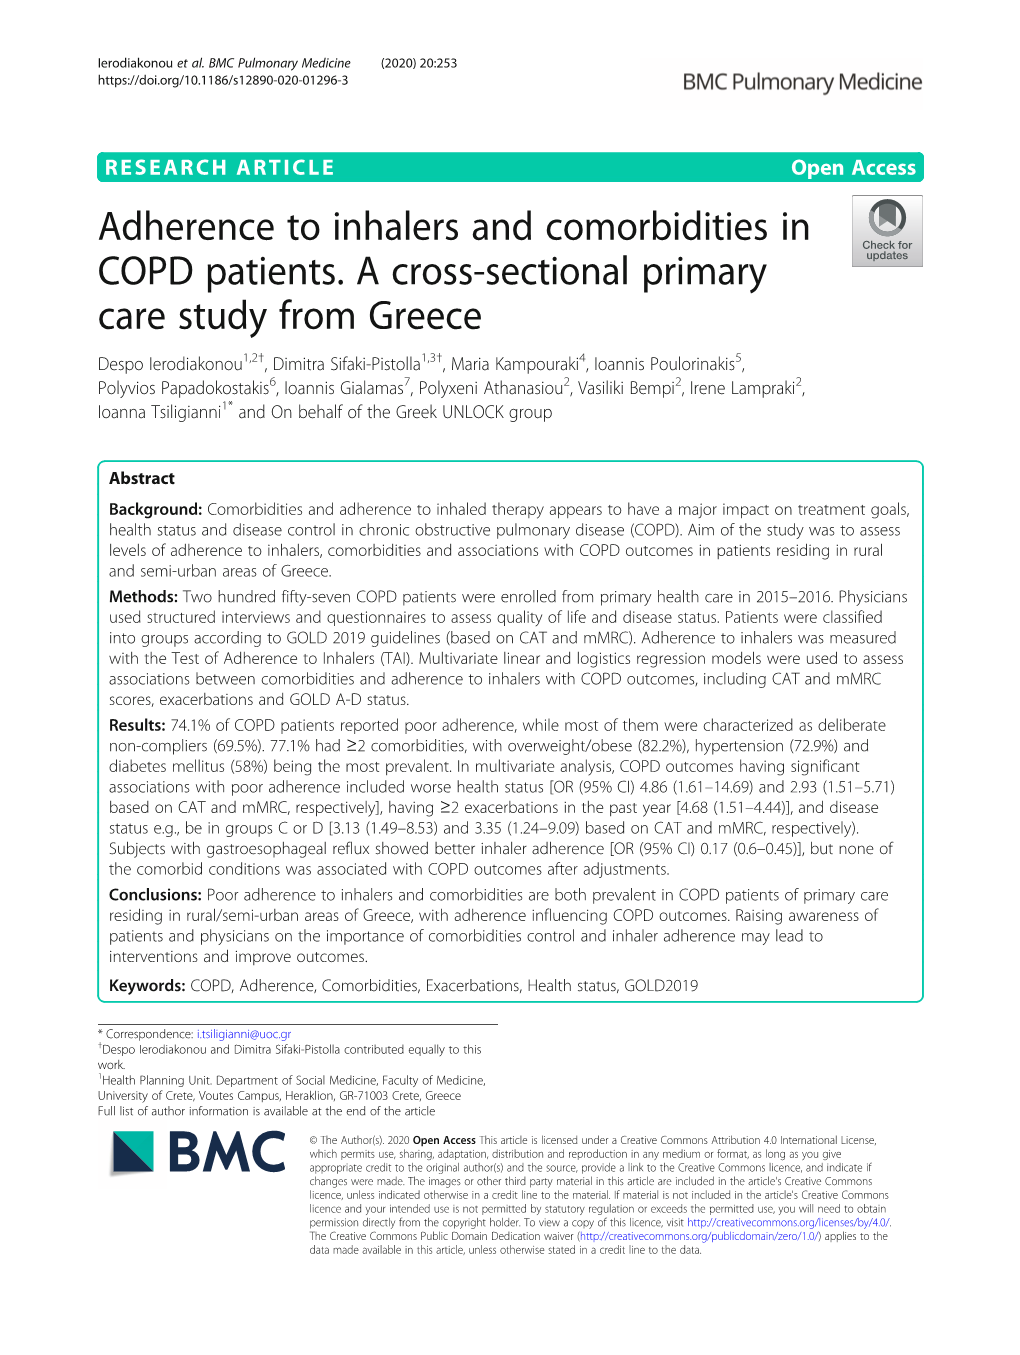 Adherence to Inhalers and Comorbidities in COPD Patients. A